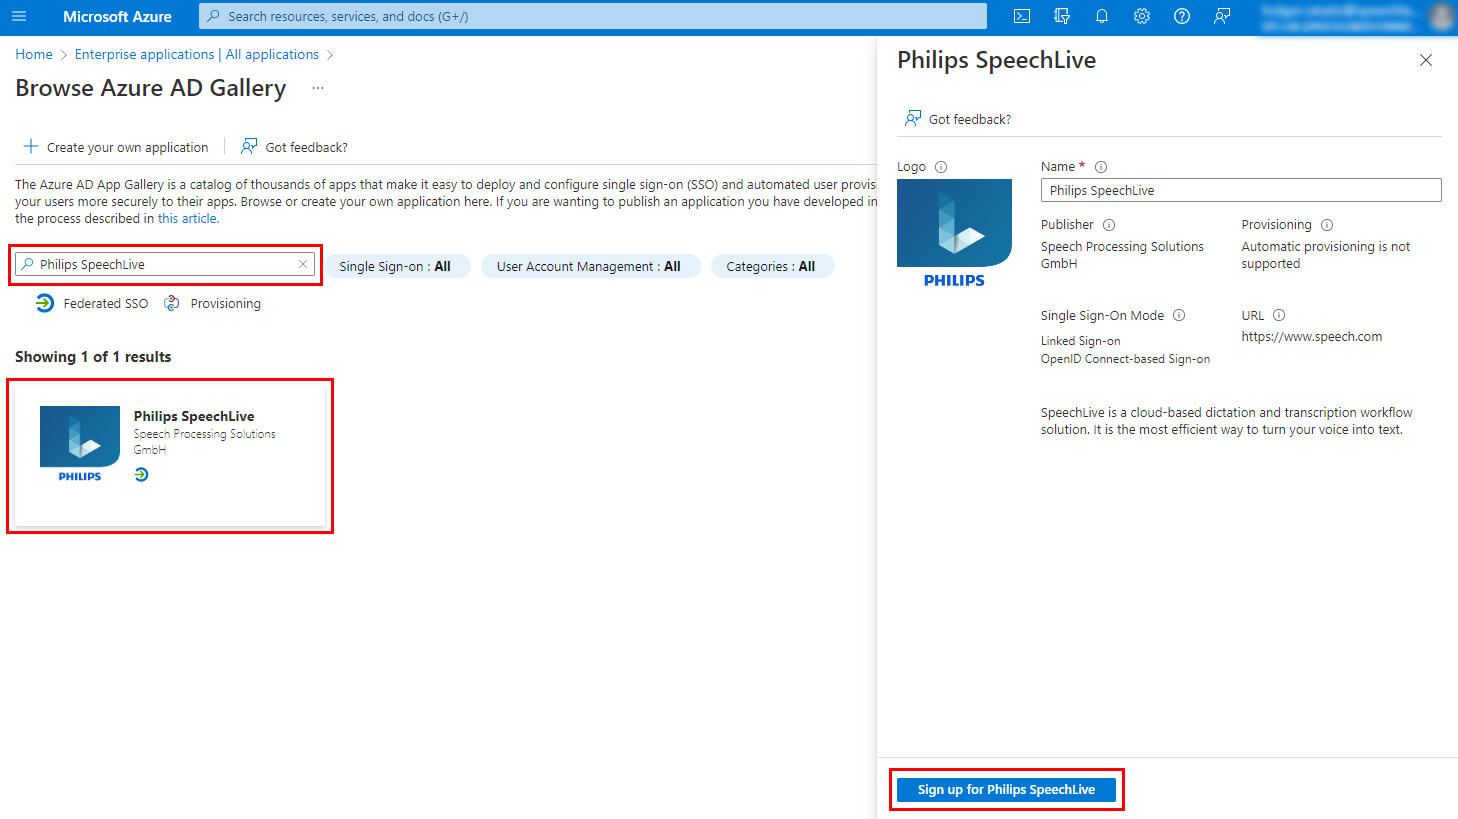 add_philips_speechlive_to_azure_galery.png